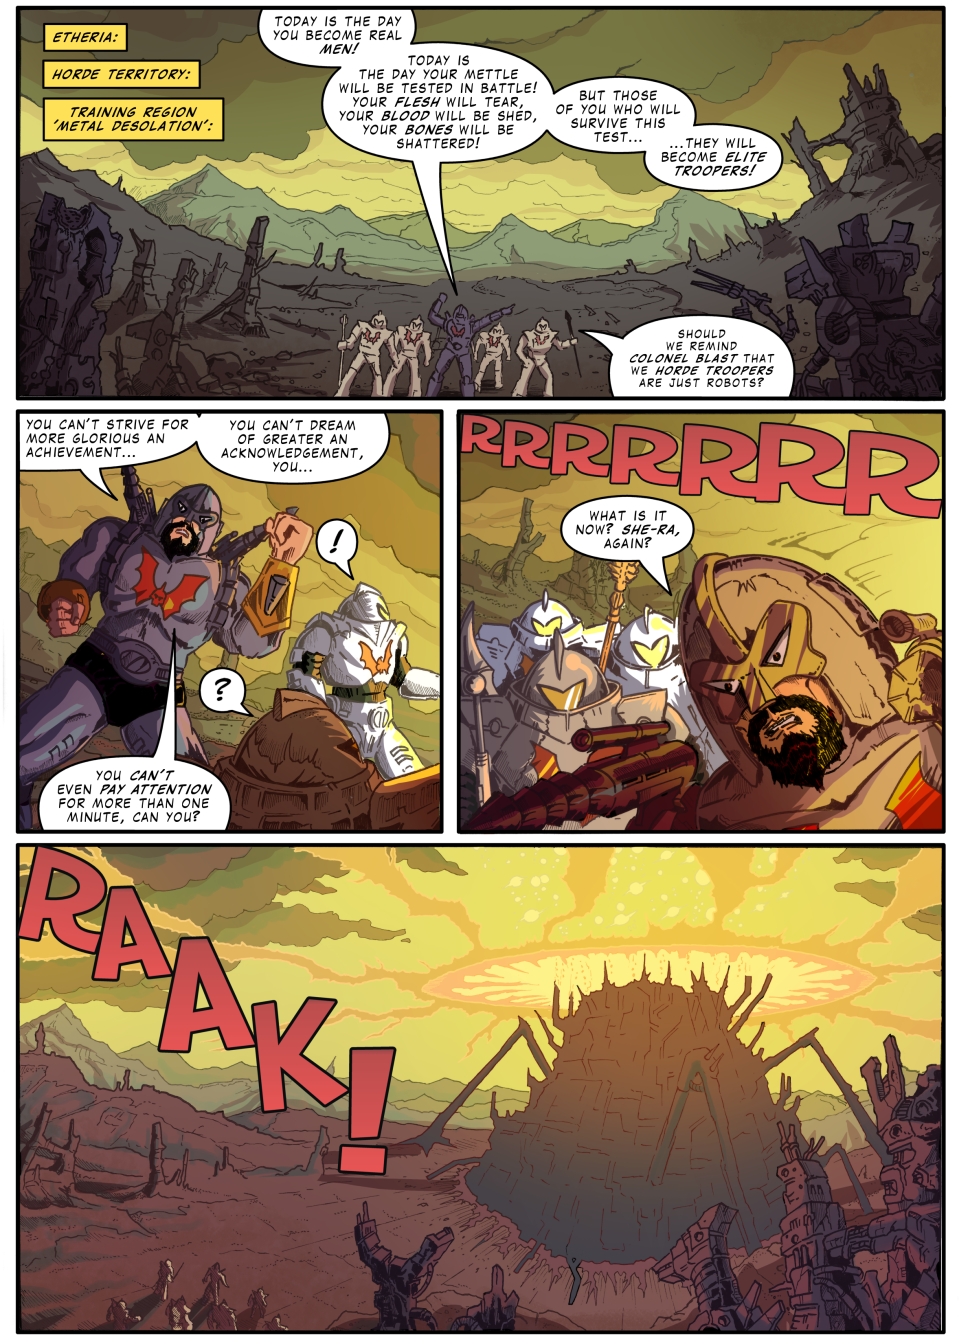 PoP/MotU - The Coming of the Towers - page 1